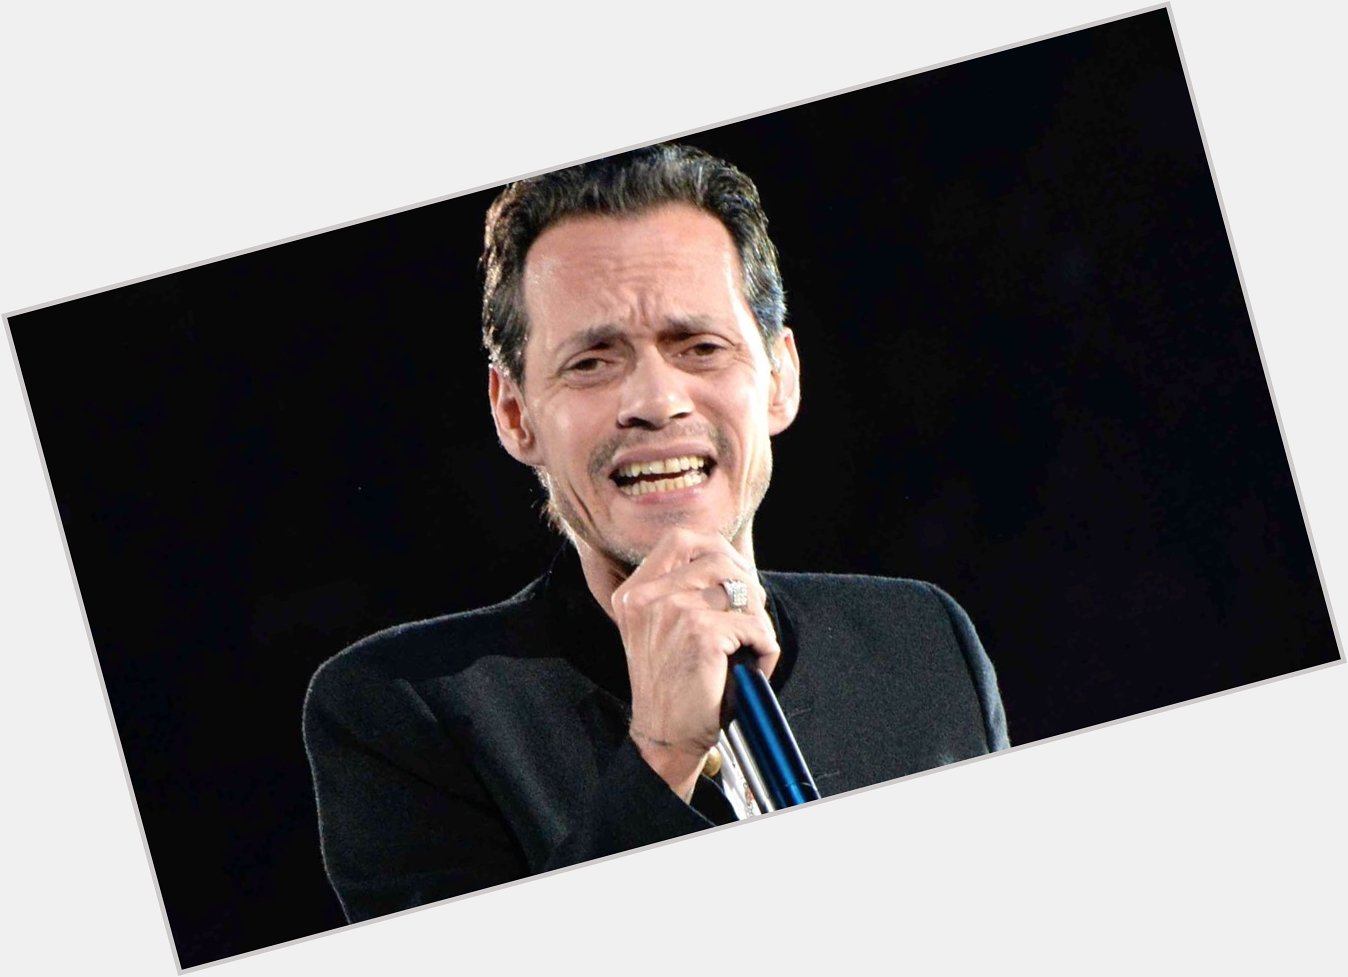 September 16, 2020
Happy birthday to American singer Marc Anthony 52 years old. 